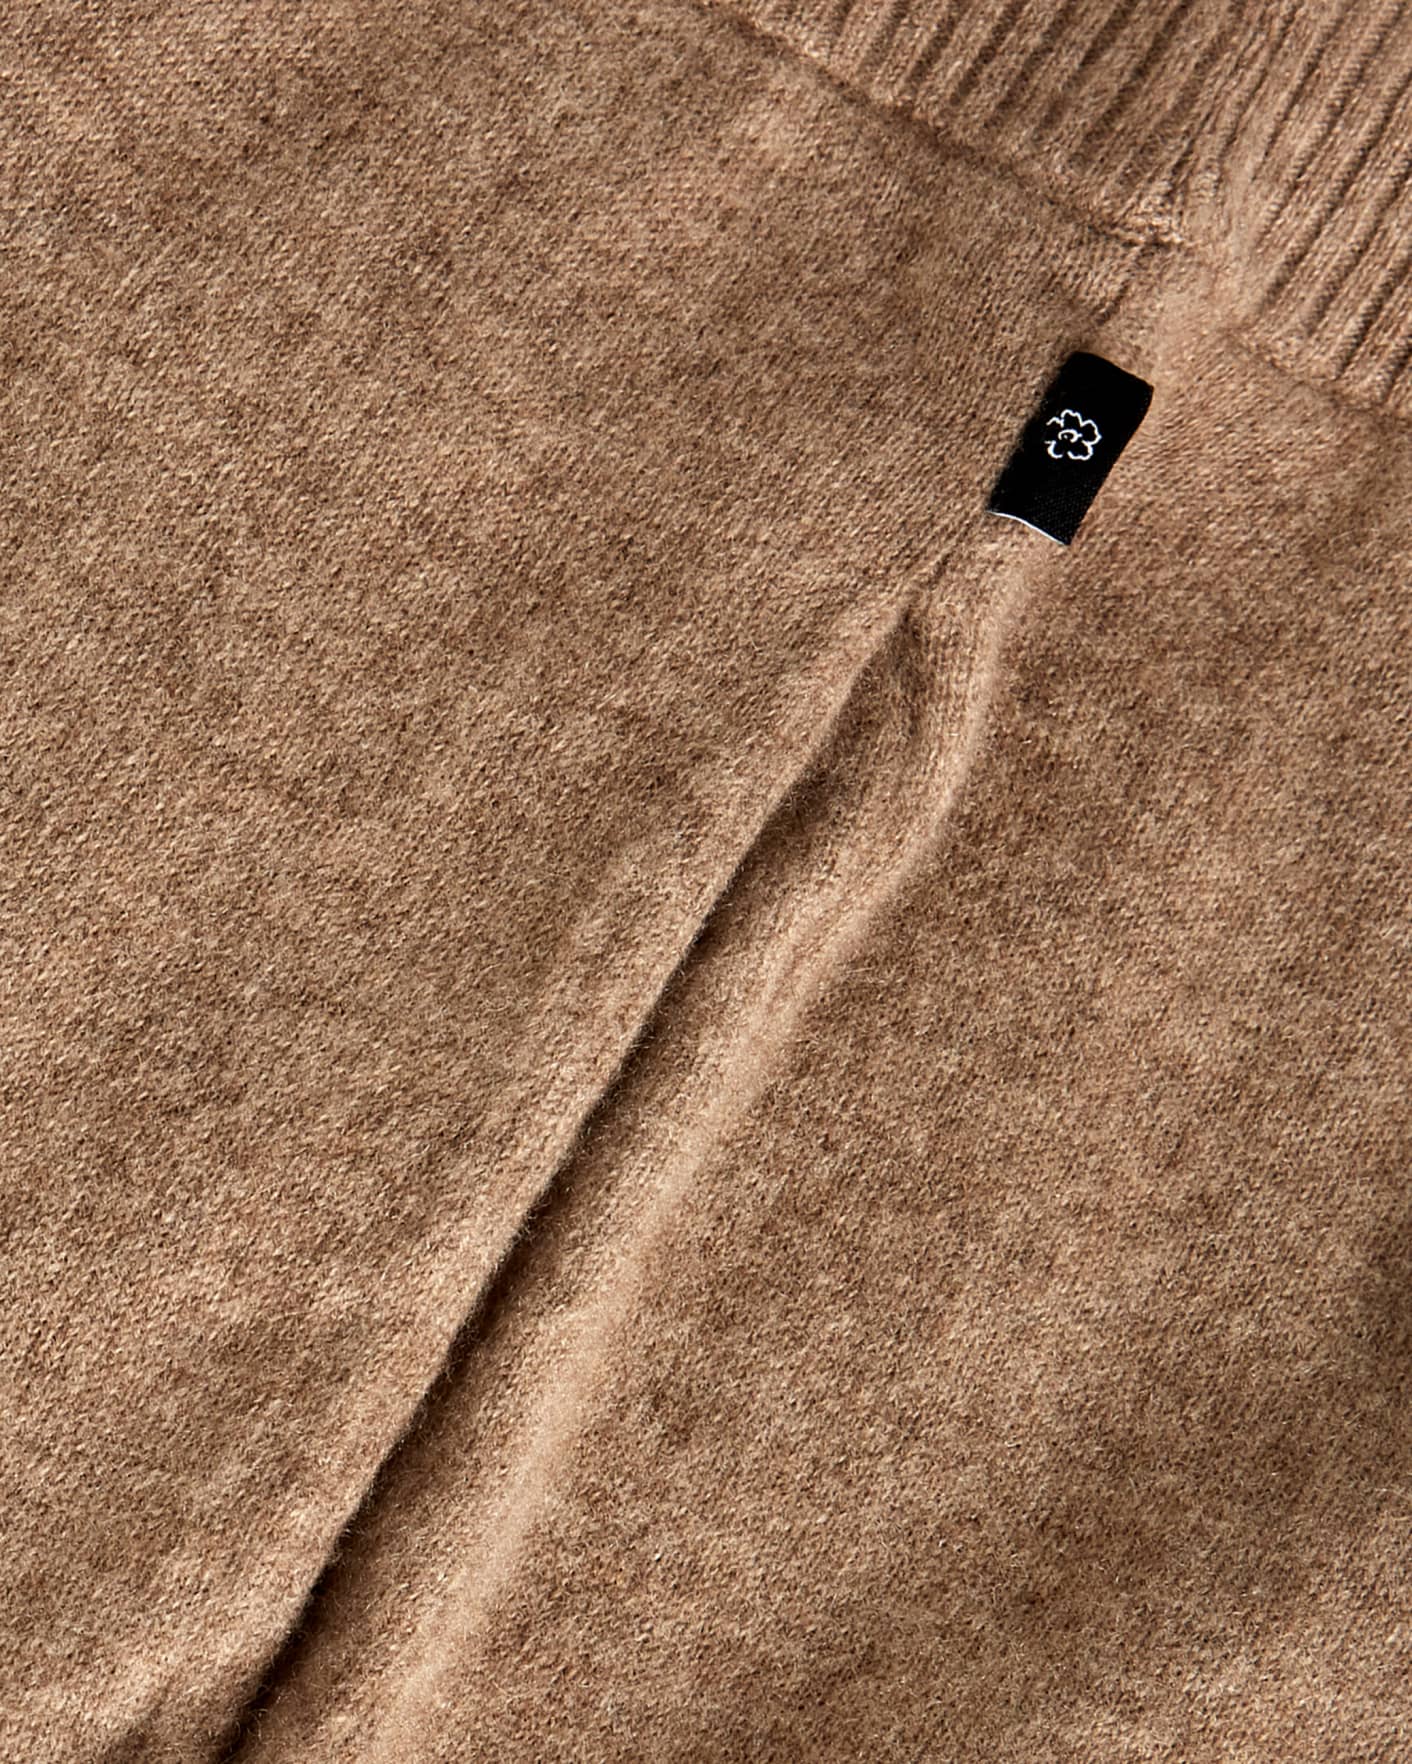 Brown Cashmere Knitted Jogger Ted Baker